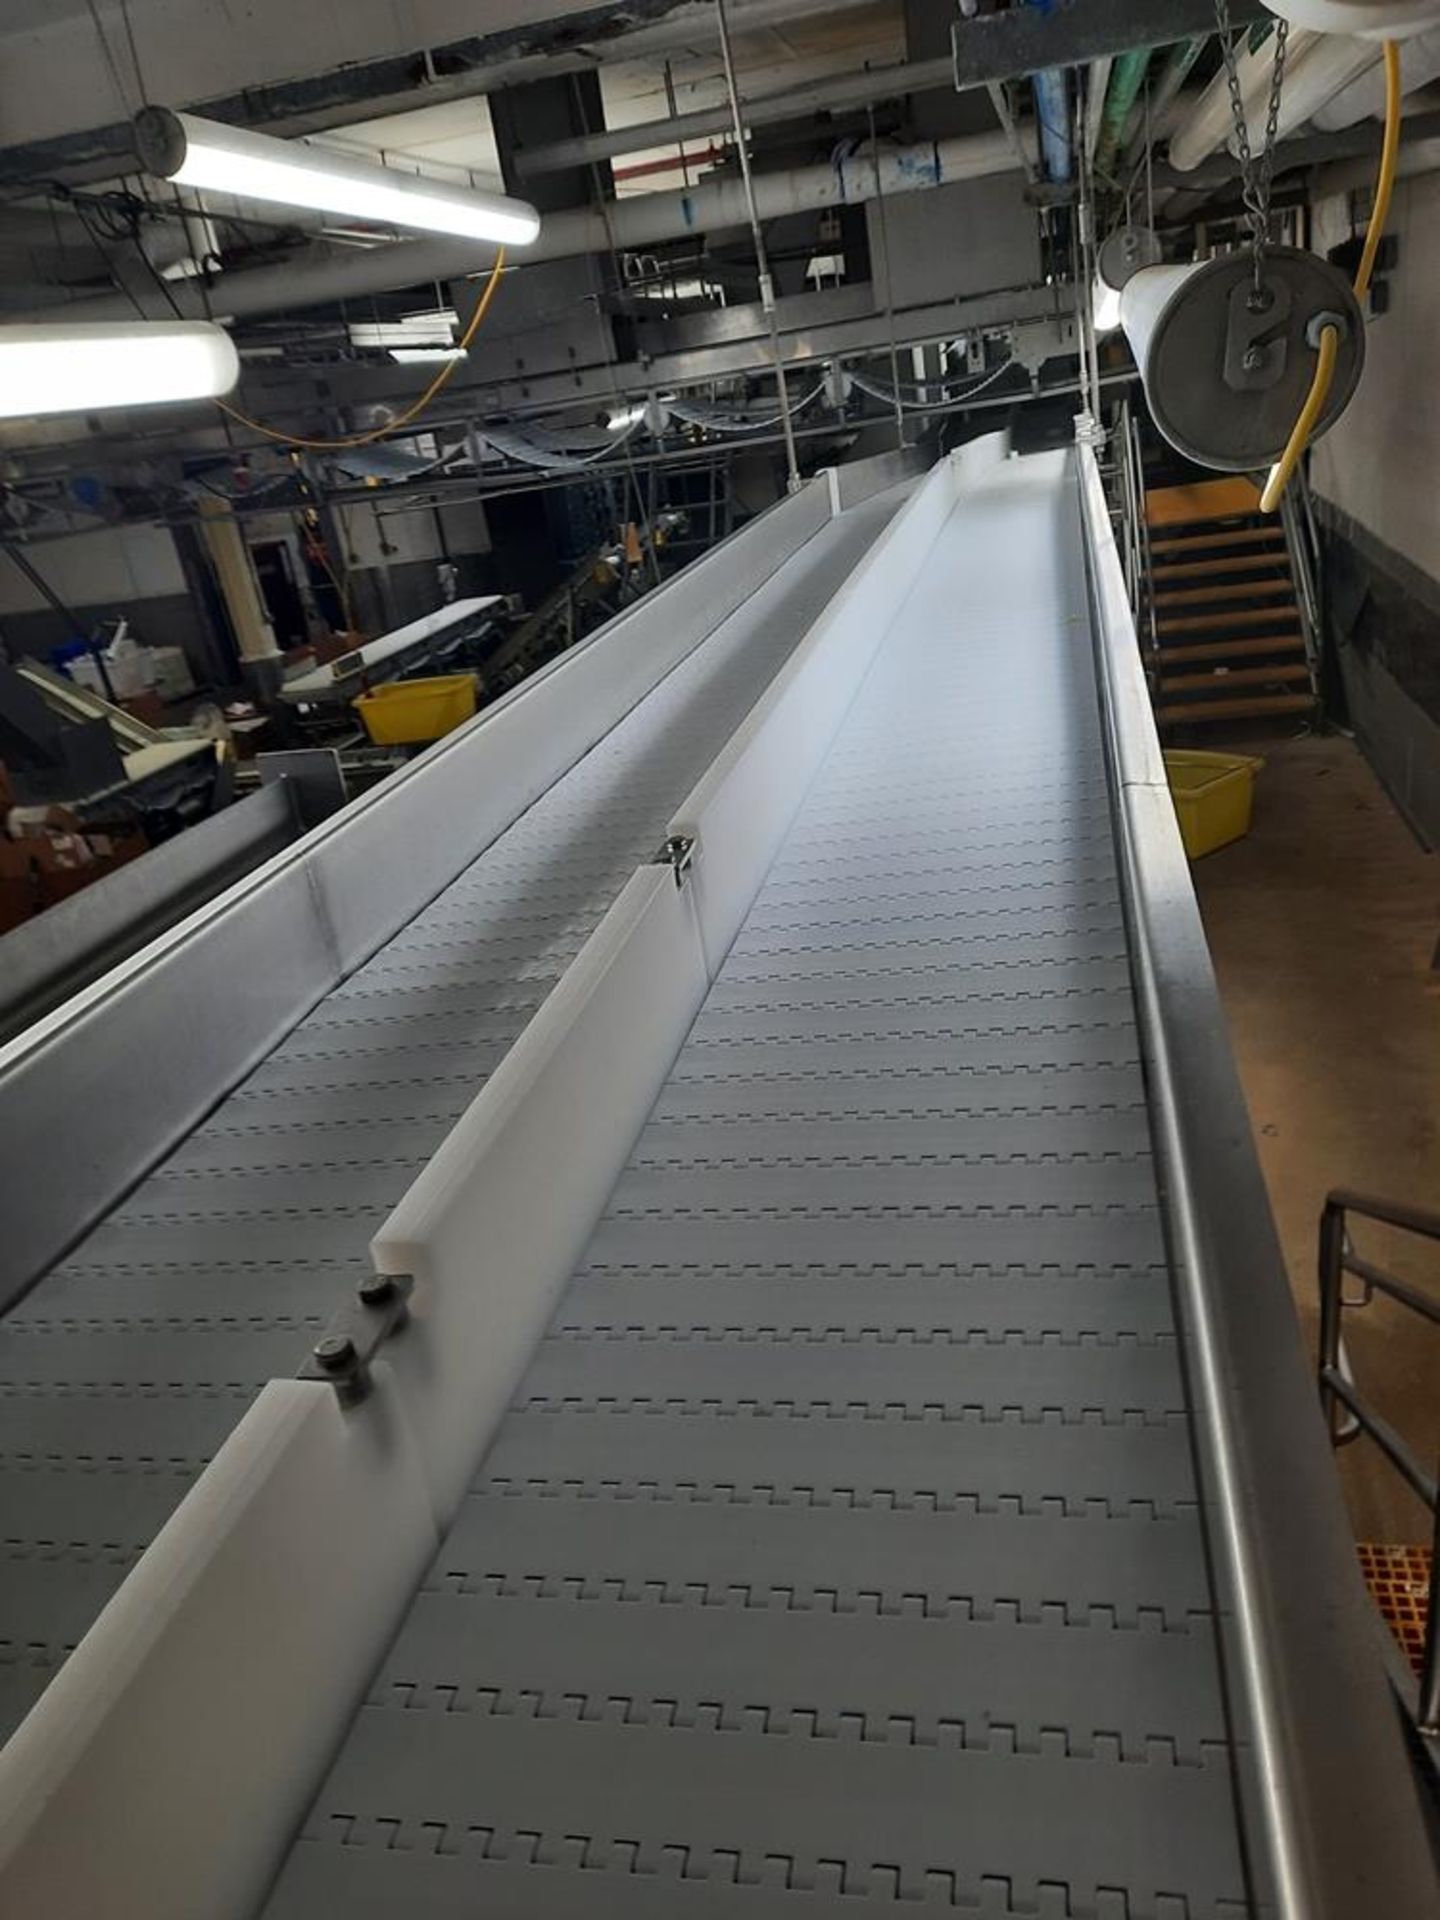 Stainless Steel Suspended Dual Lane Conveyor, 24"wide, (2) 12" W X 60' L, stainless steel motor, - Image 3 of 3